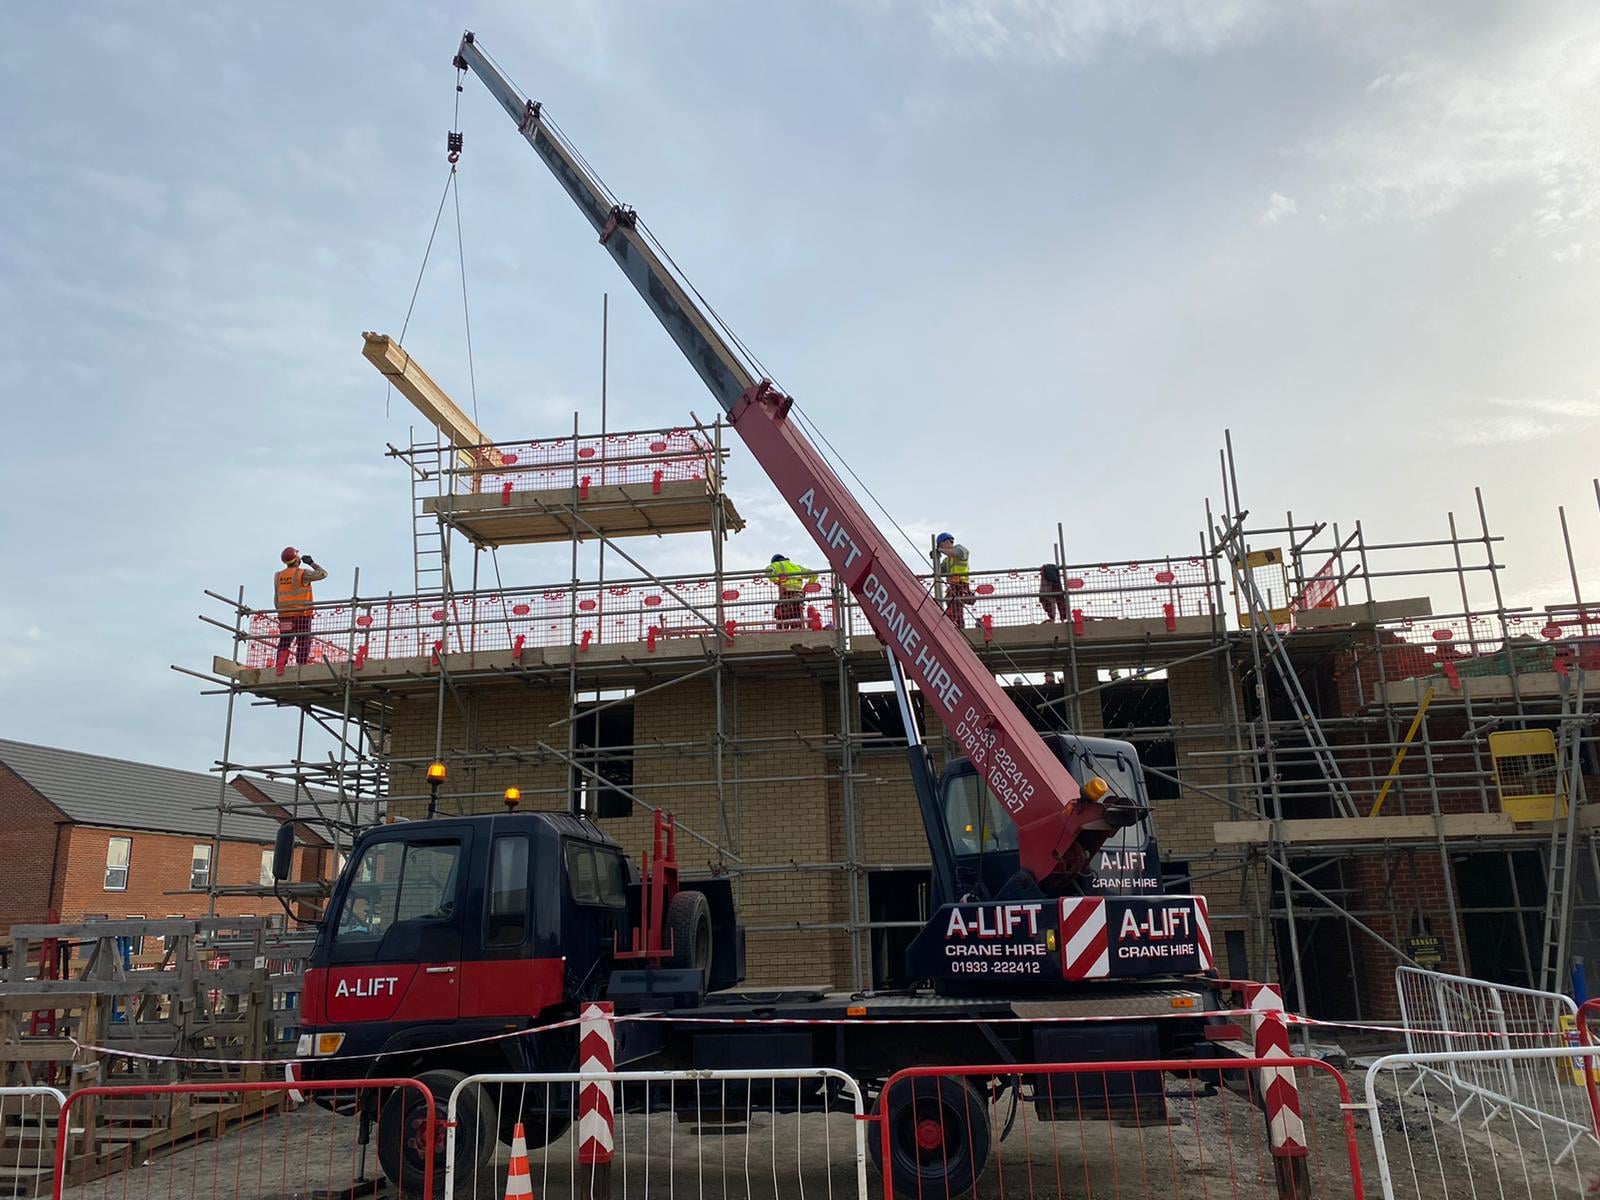 Crane Hire in Northampton lifting roof trusses for housing development company